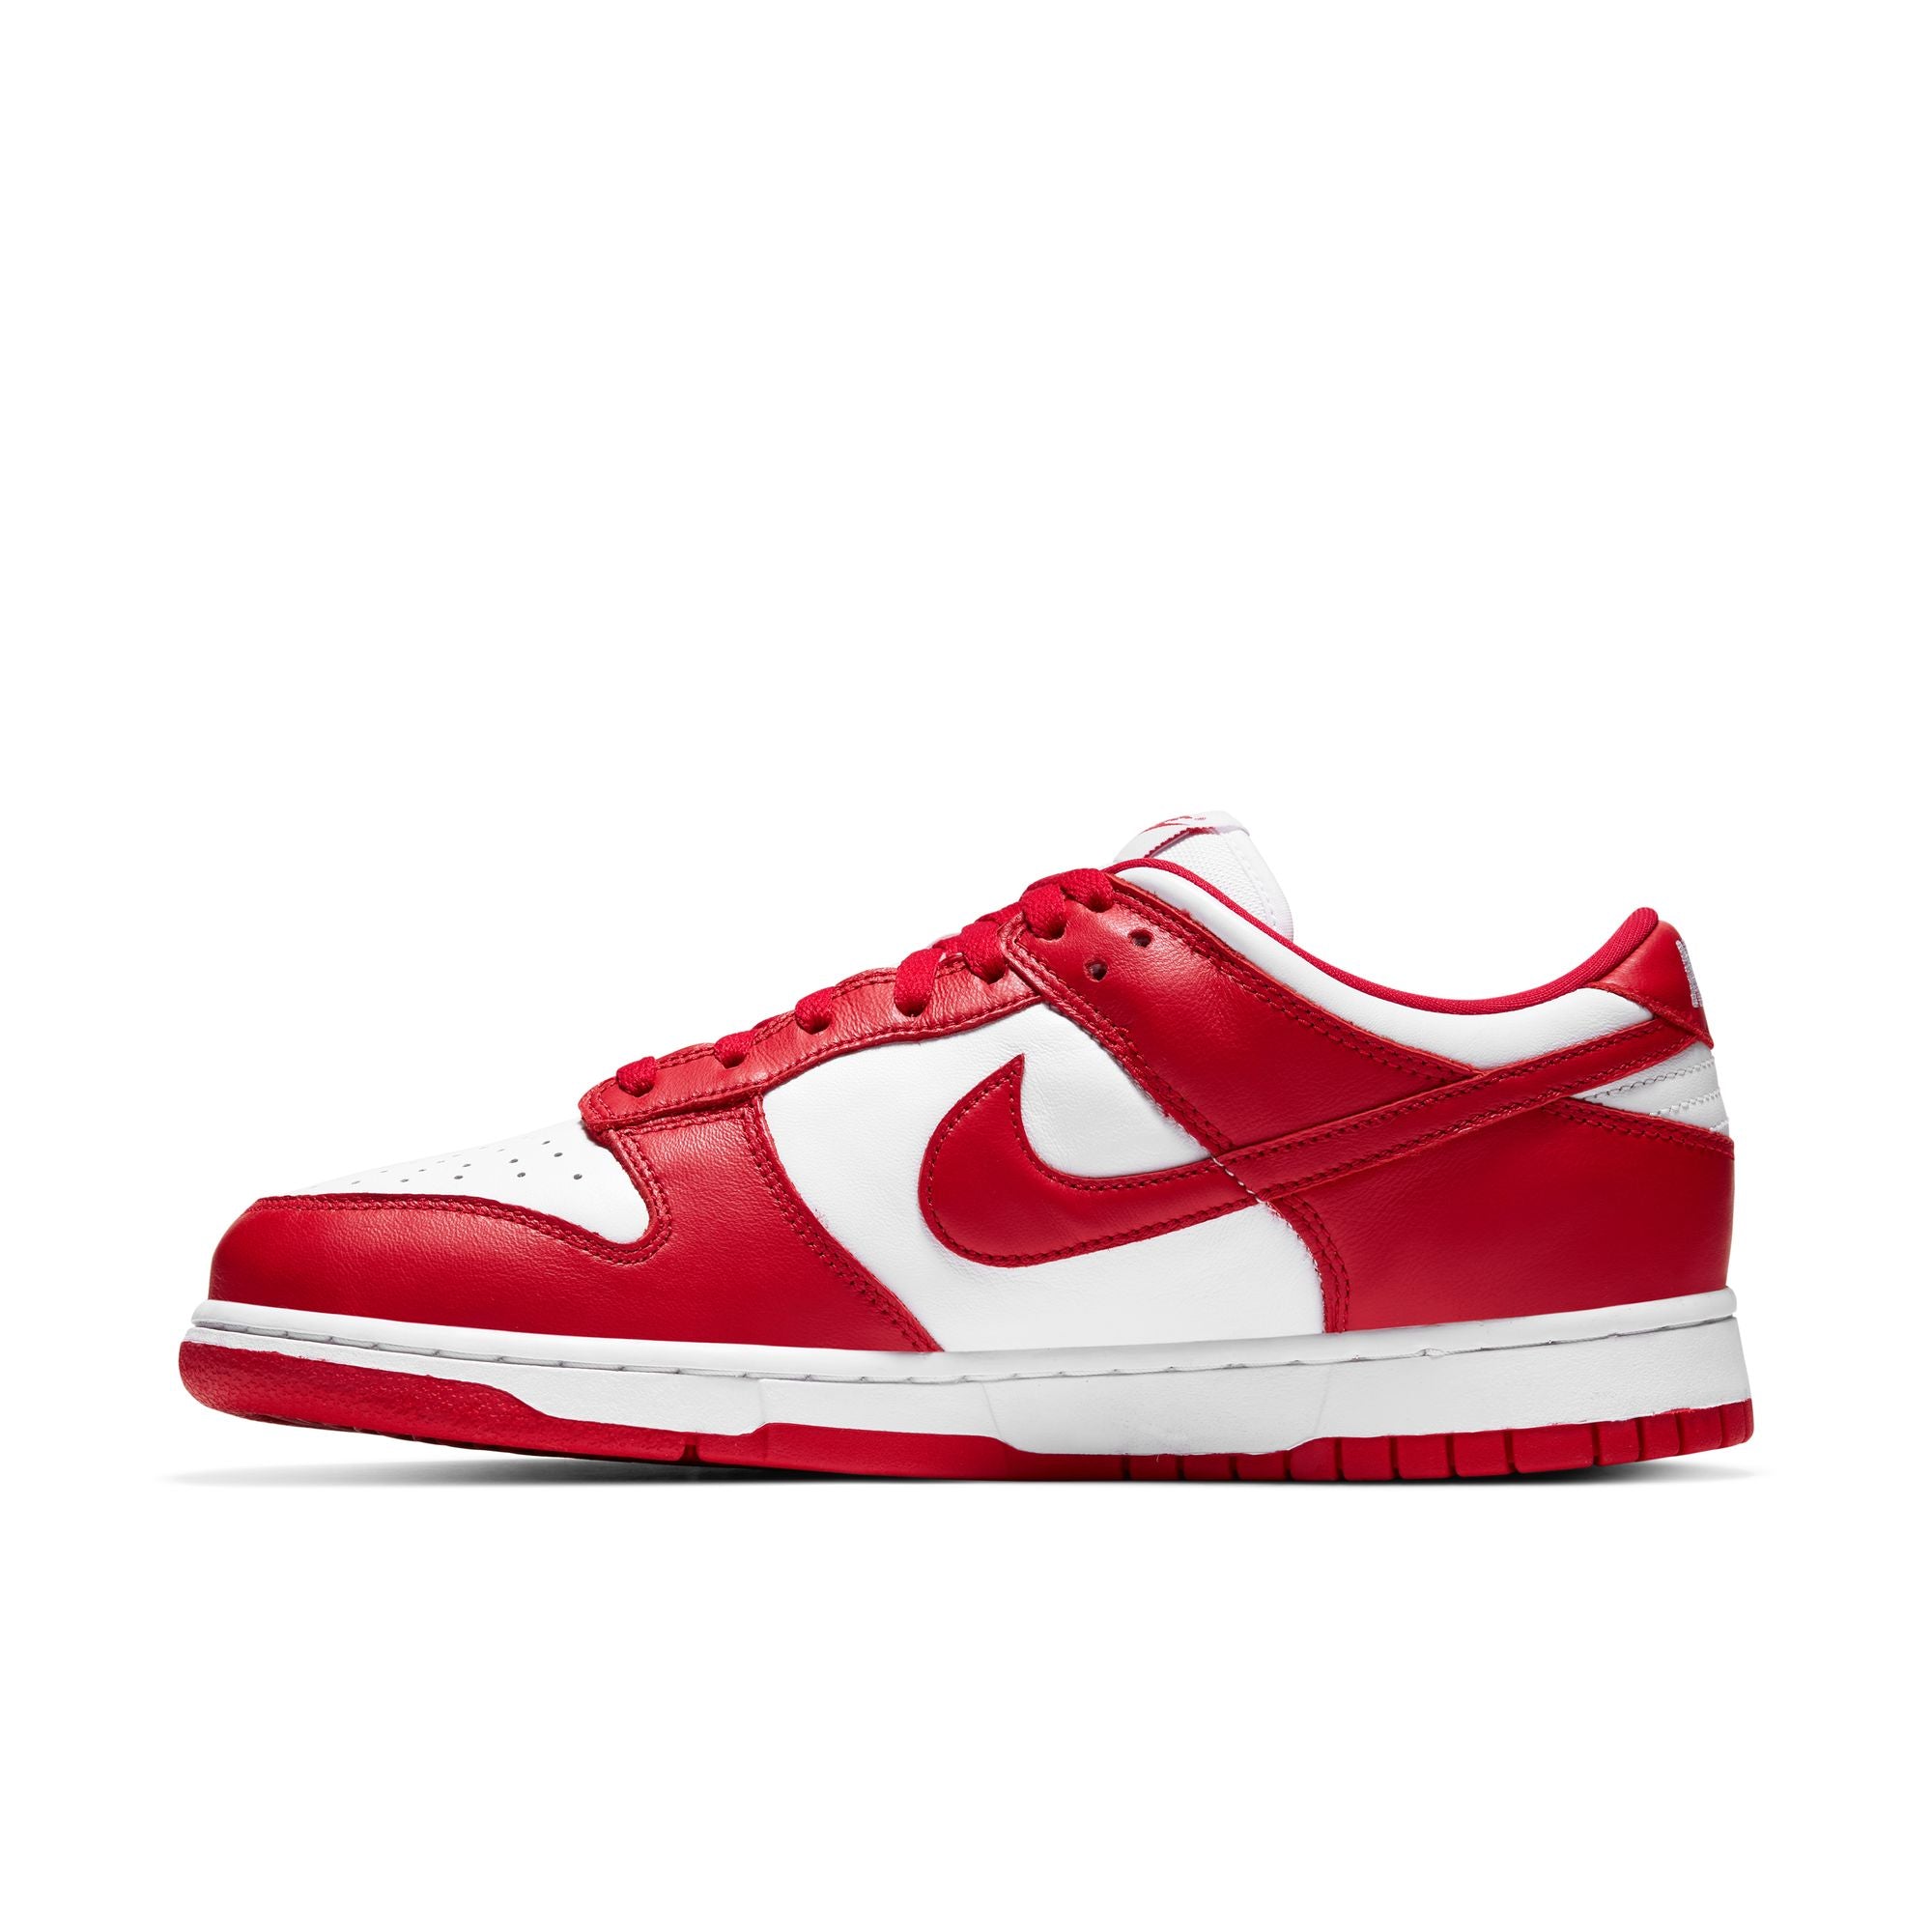 NIKE - Nike Dunk Low Sp - (White/University Red) view 7